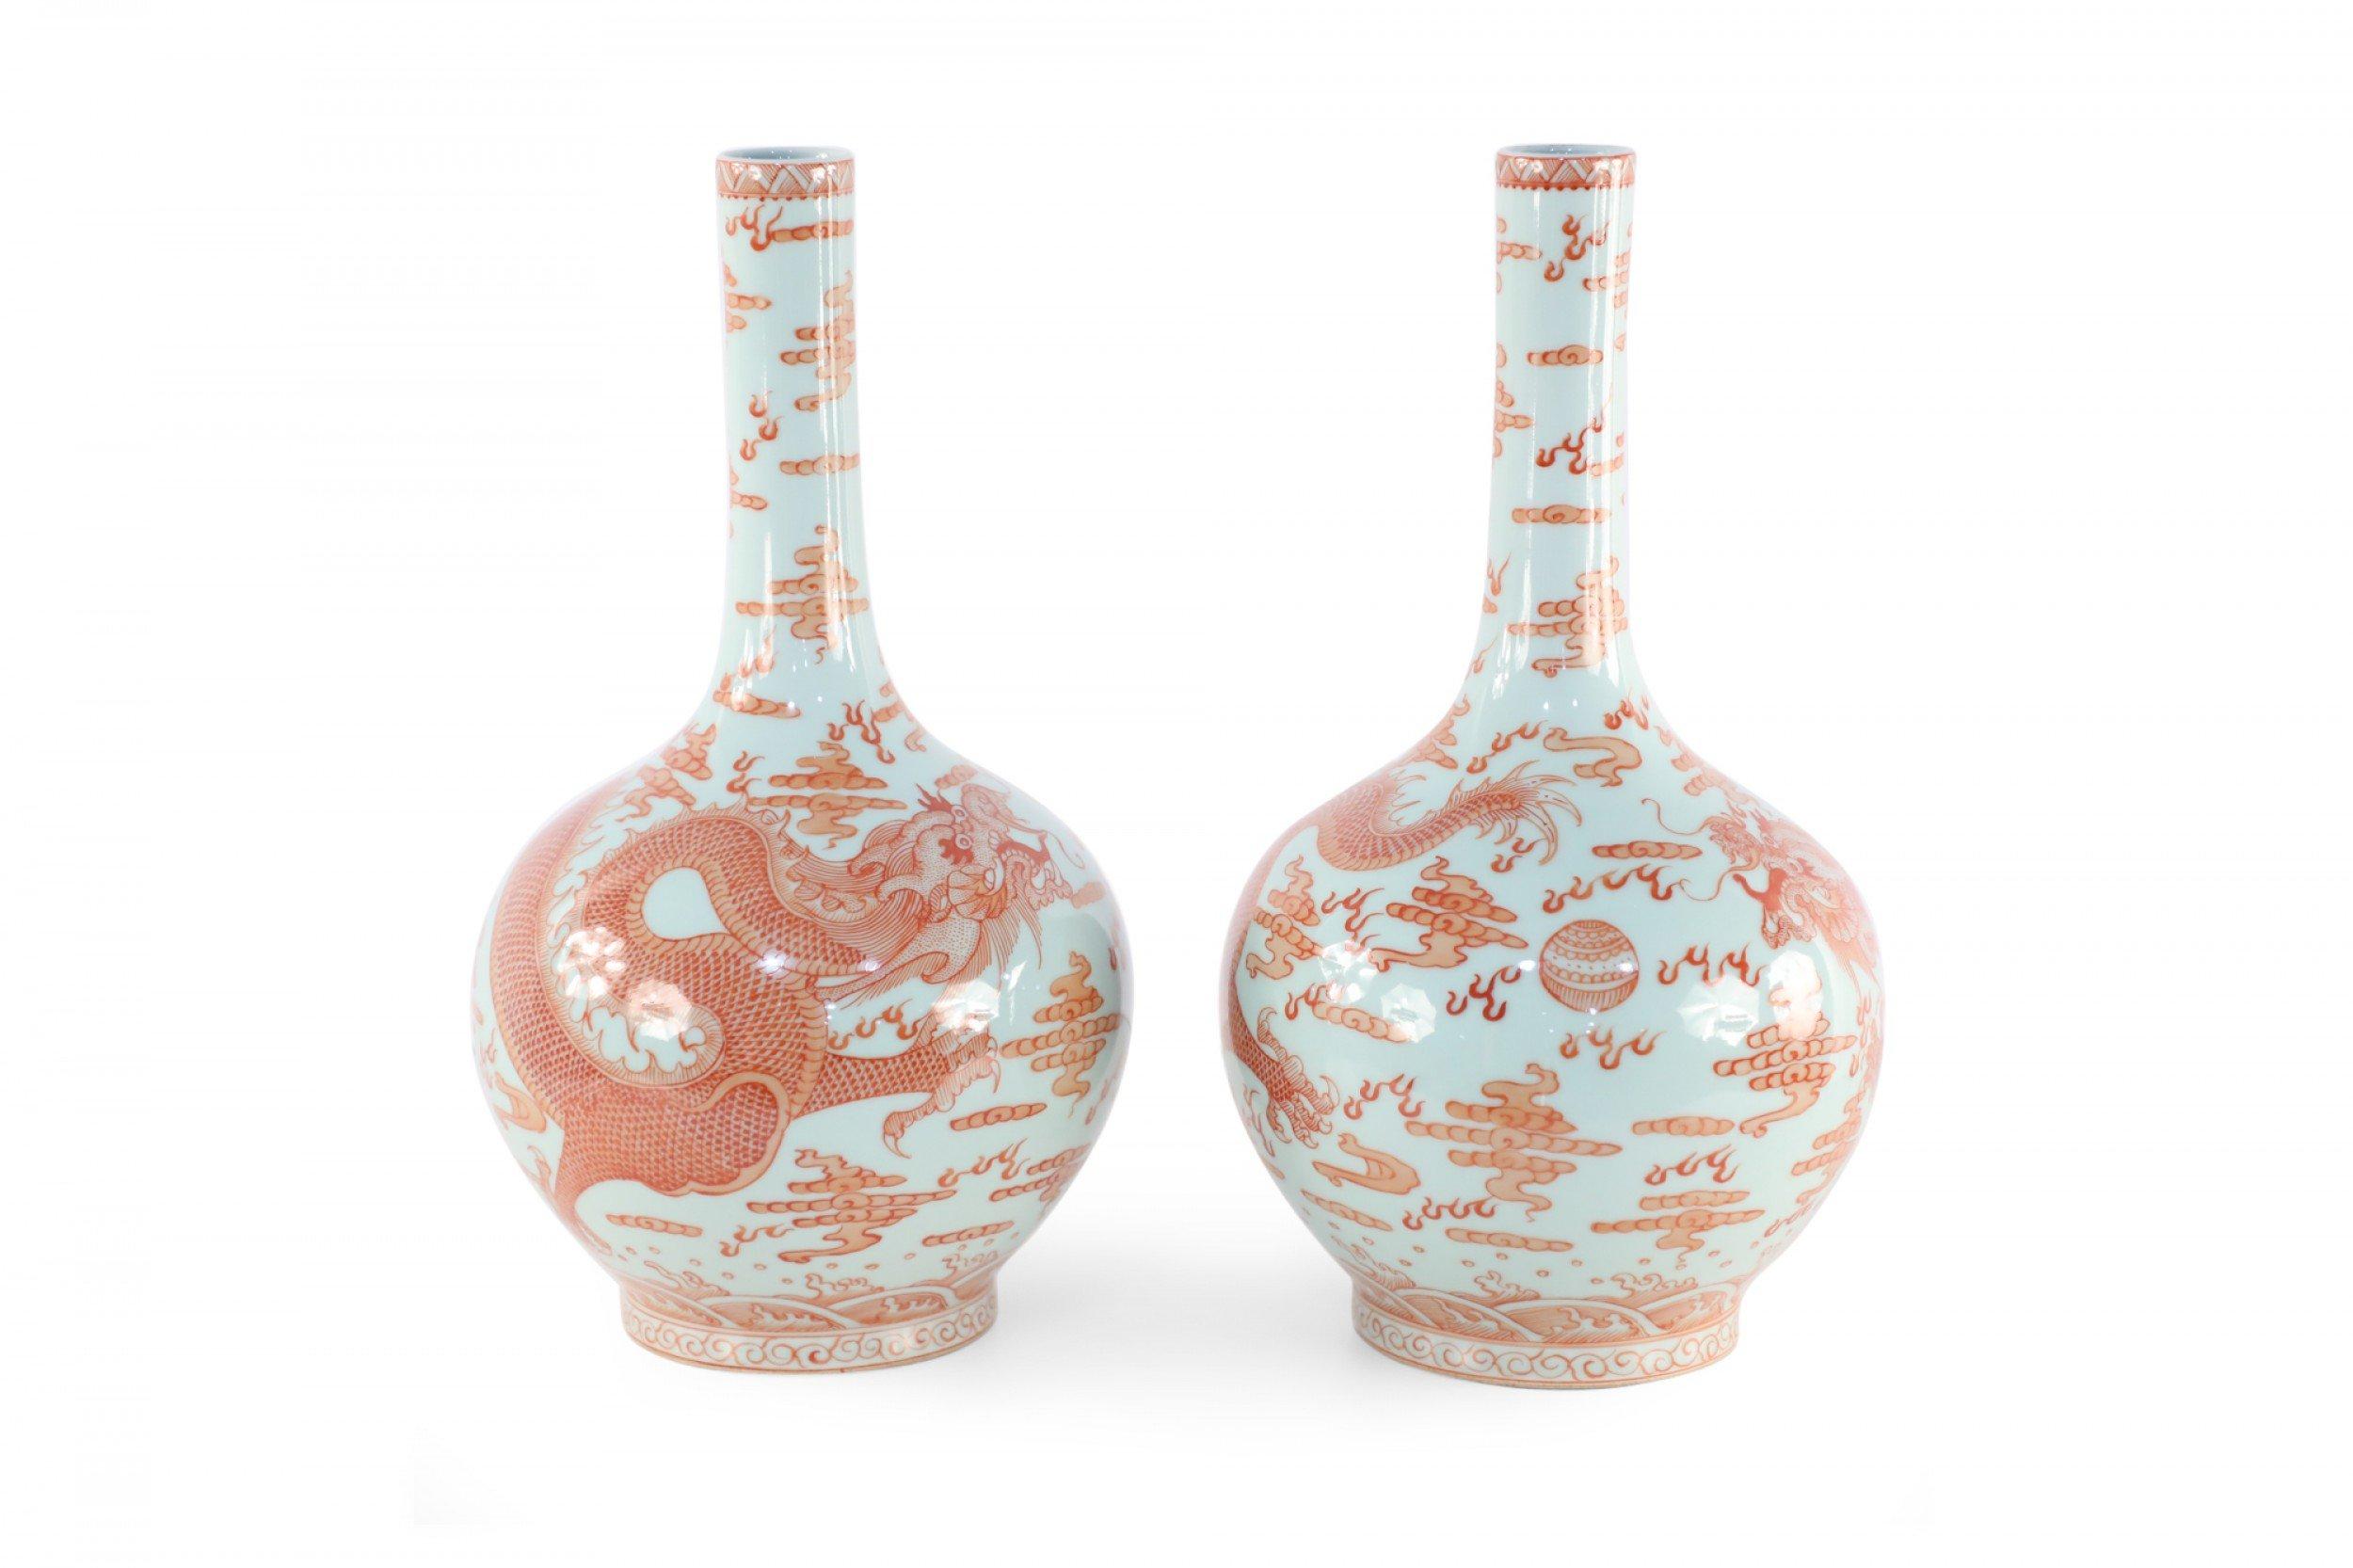 Pair of Chinese Qing Dynasty Yongzheng Period (Early 18th Century) light gray porcelain vases with globular forms wrapped in alum red glaze dragon motifs (date mark on bottoms) (PRICED AS PAIR) (Similar vases: NWL2048).
 